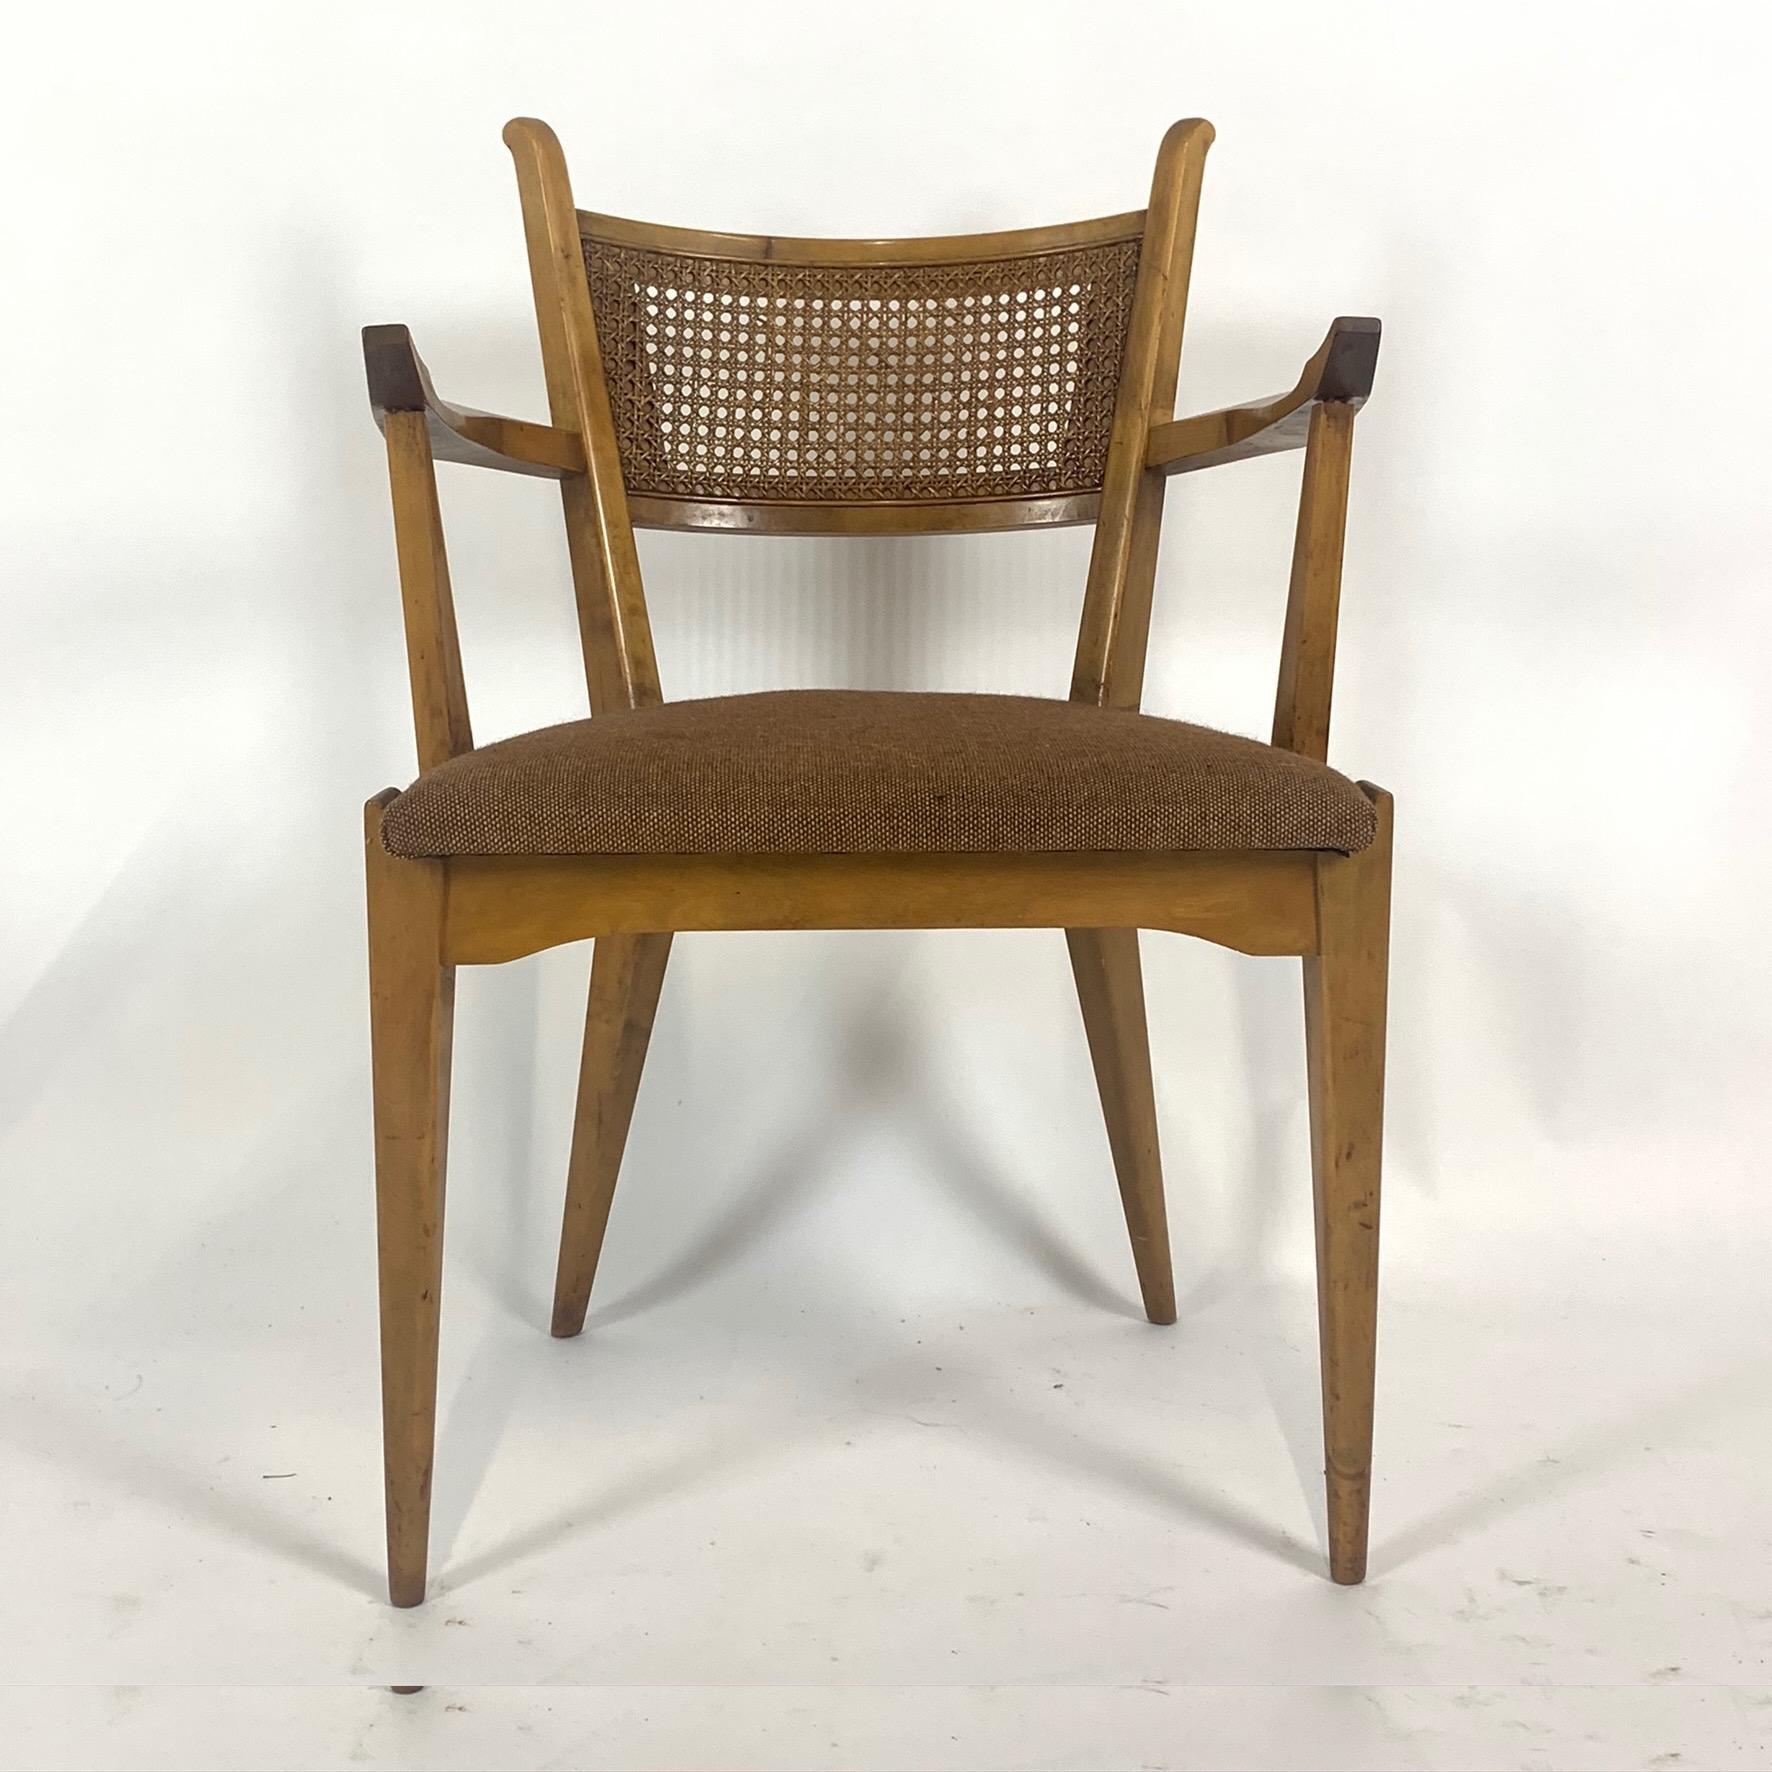 Wool Rare Set of 6 Swedish Modern Cane Back Sculptural Dining Chairs by Edmond Spence